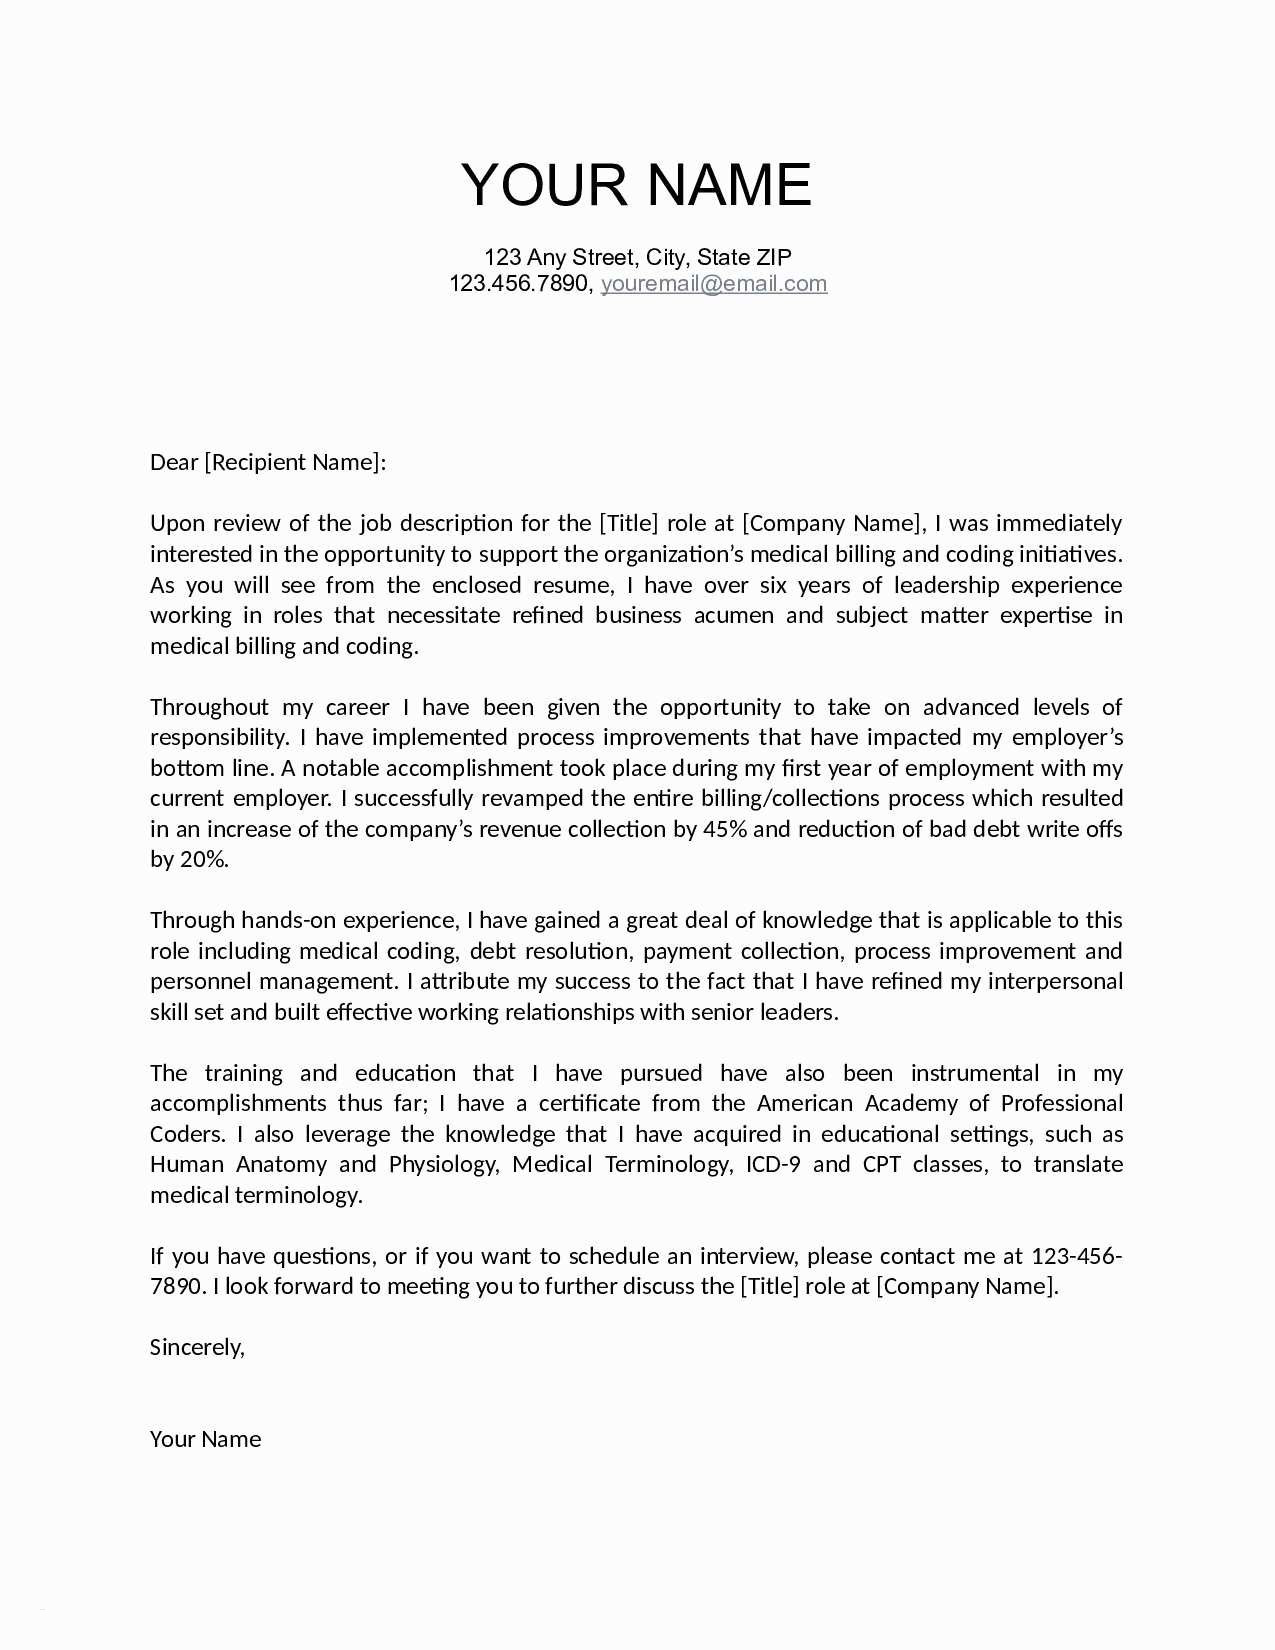 Business Thank You Letter Template - New Thank You Letter Business Template Tellmeladwp